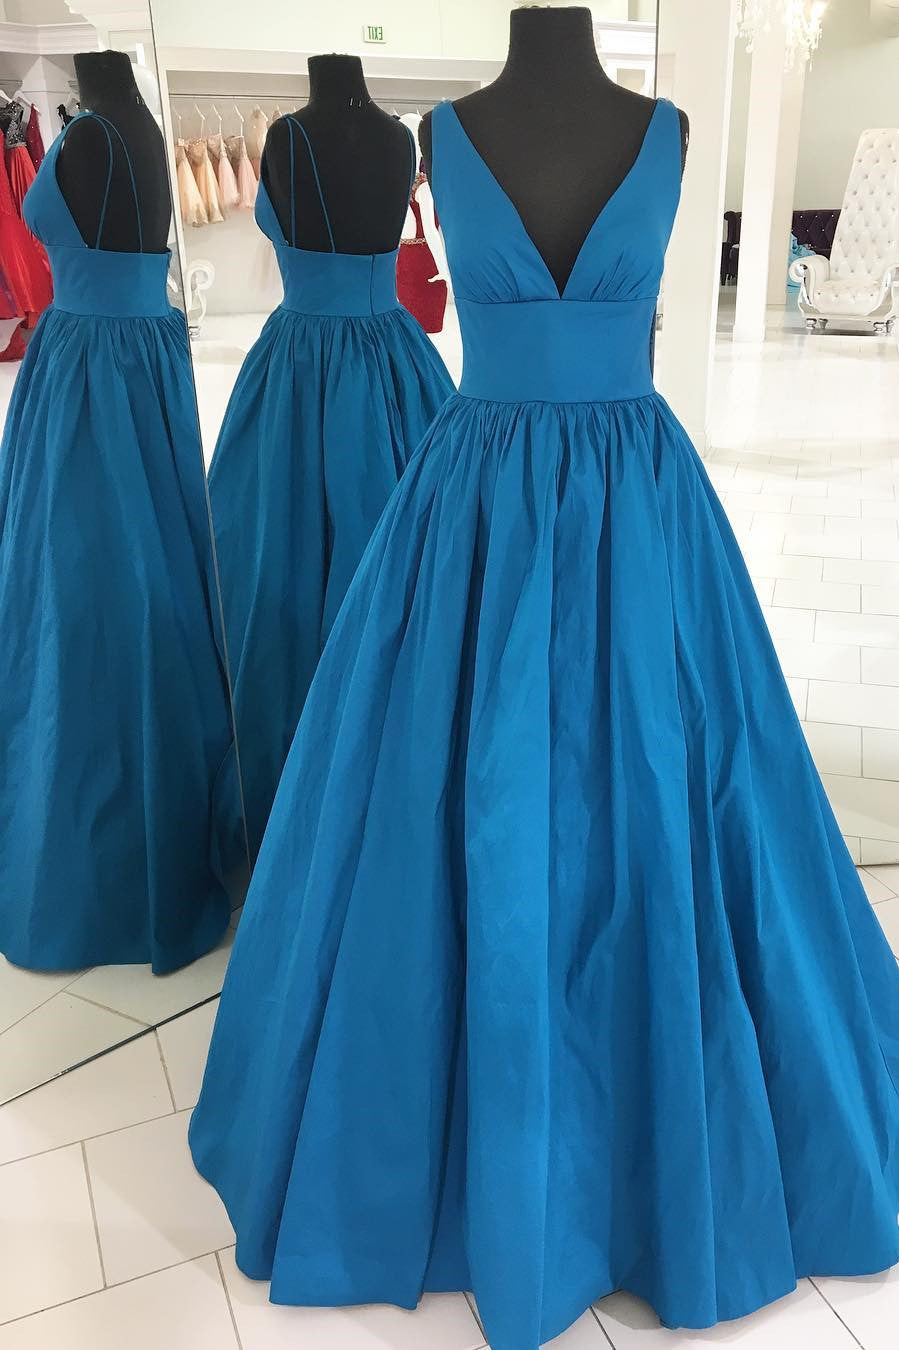 A Line Prom Dress, Prom Dresses, Evening Gown,Graduation School Party Gown, Winter Formal Dress